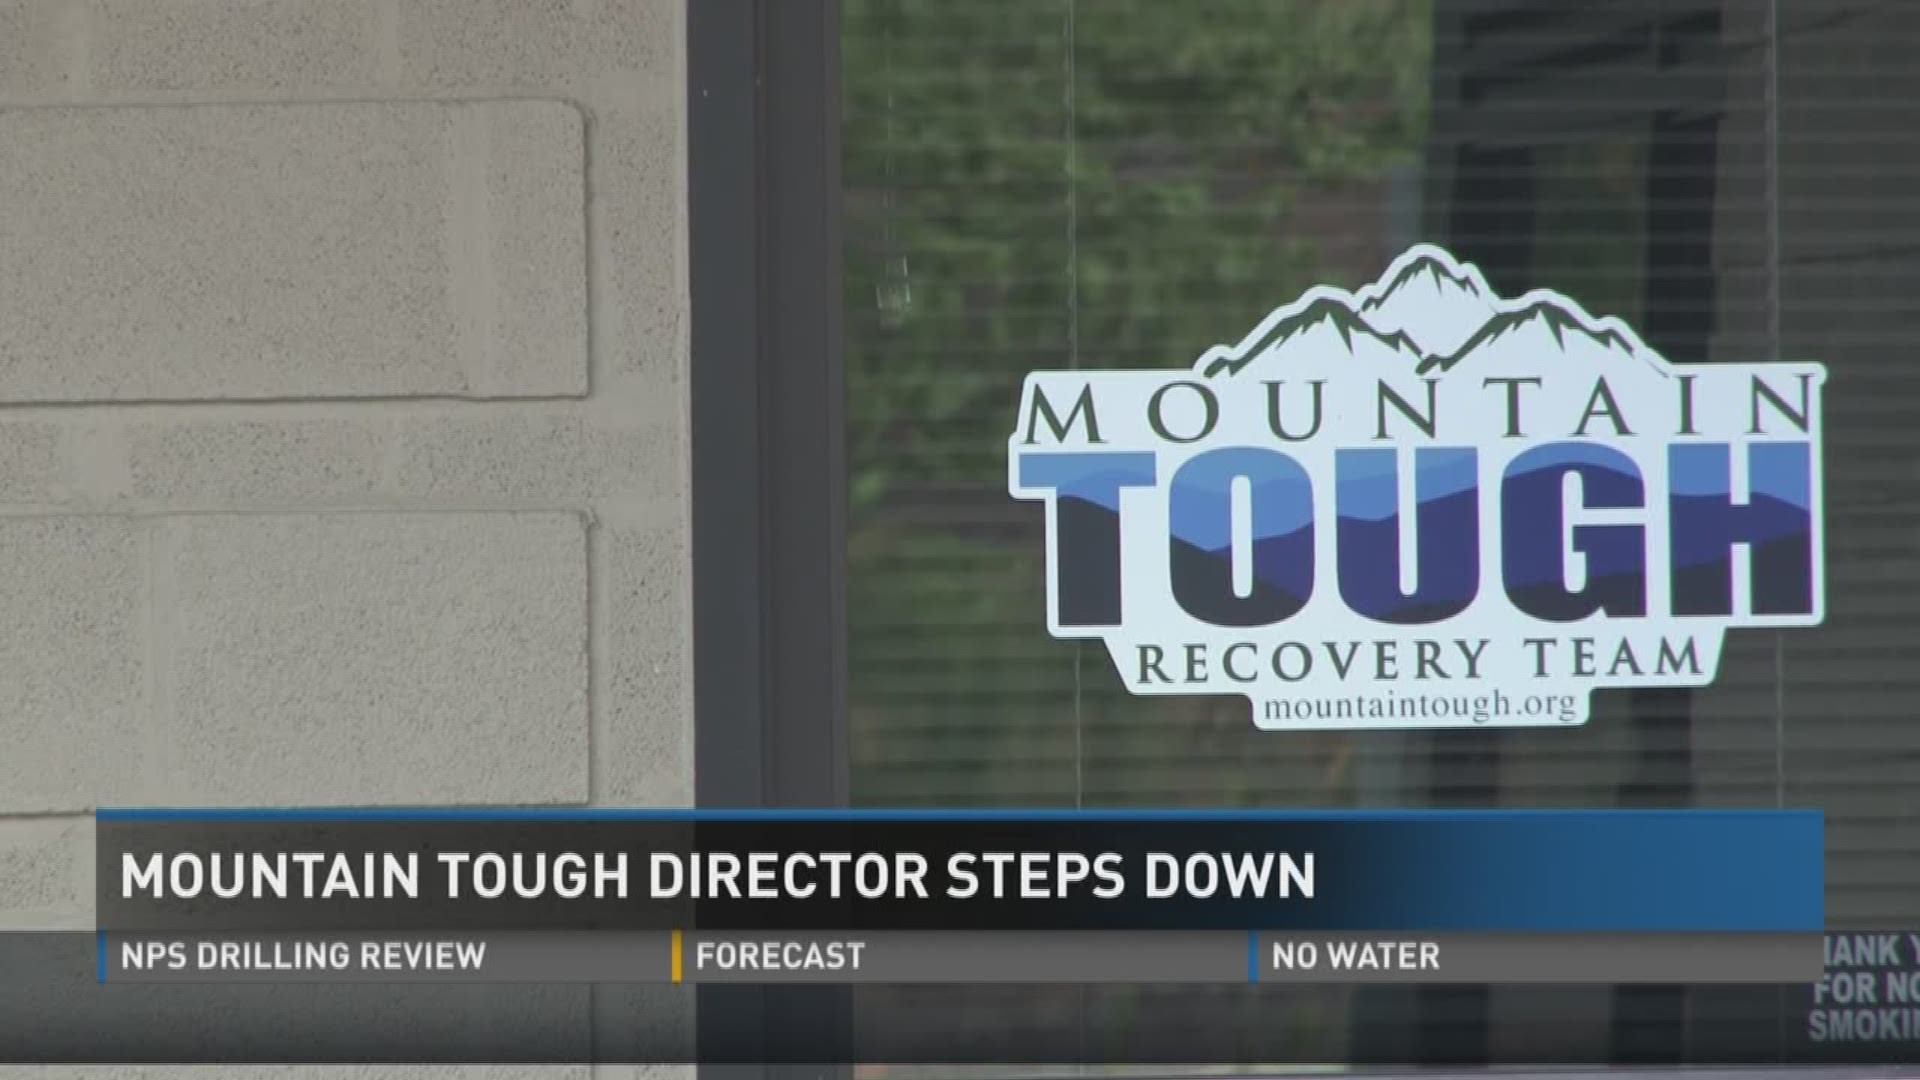 July 19, 2017: The executive director of the Mountain Tough organization has stepped down.